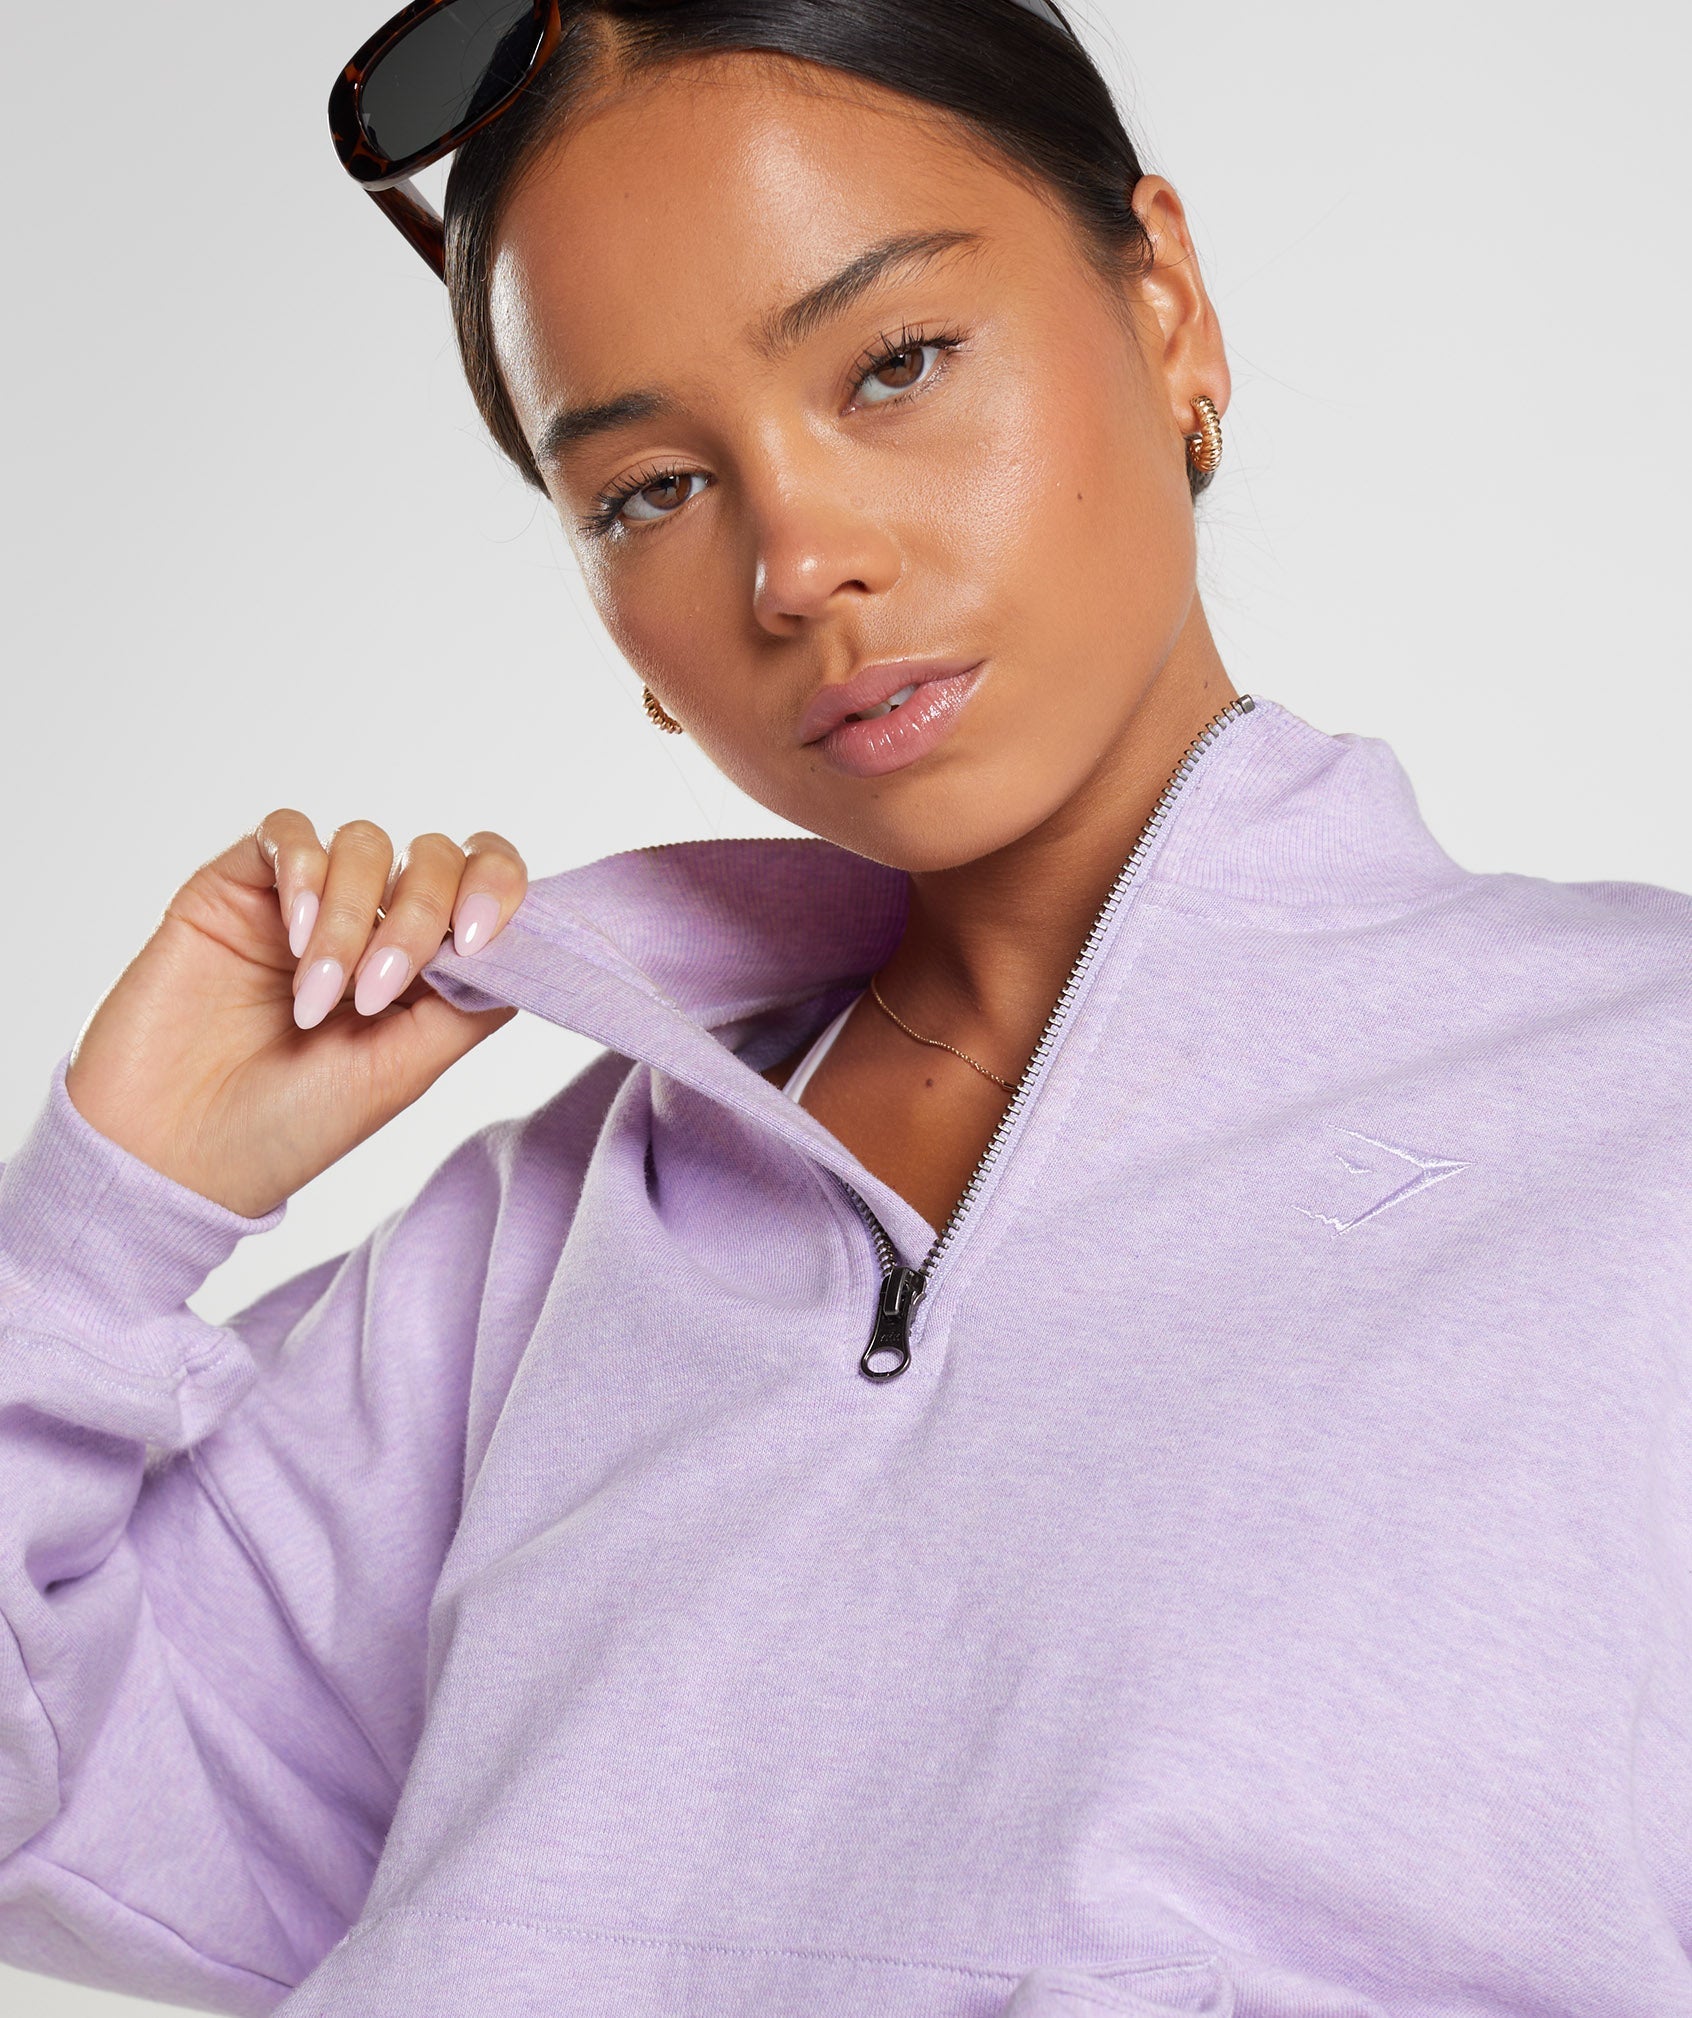 Rest Day Sweats 1/2 Zip Pullover in Aura Lilac Marl - view 4